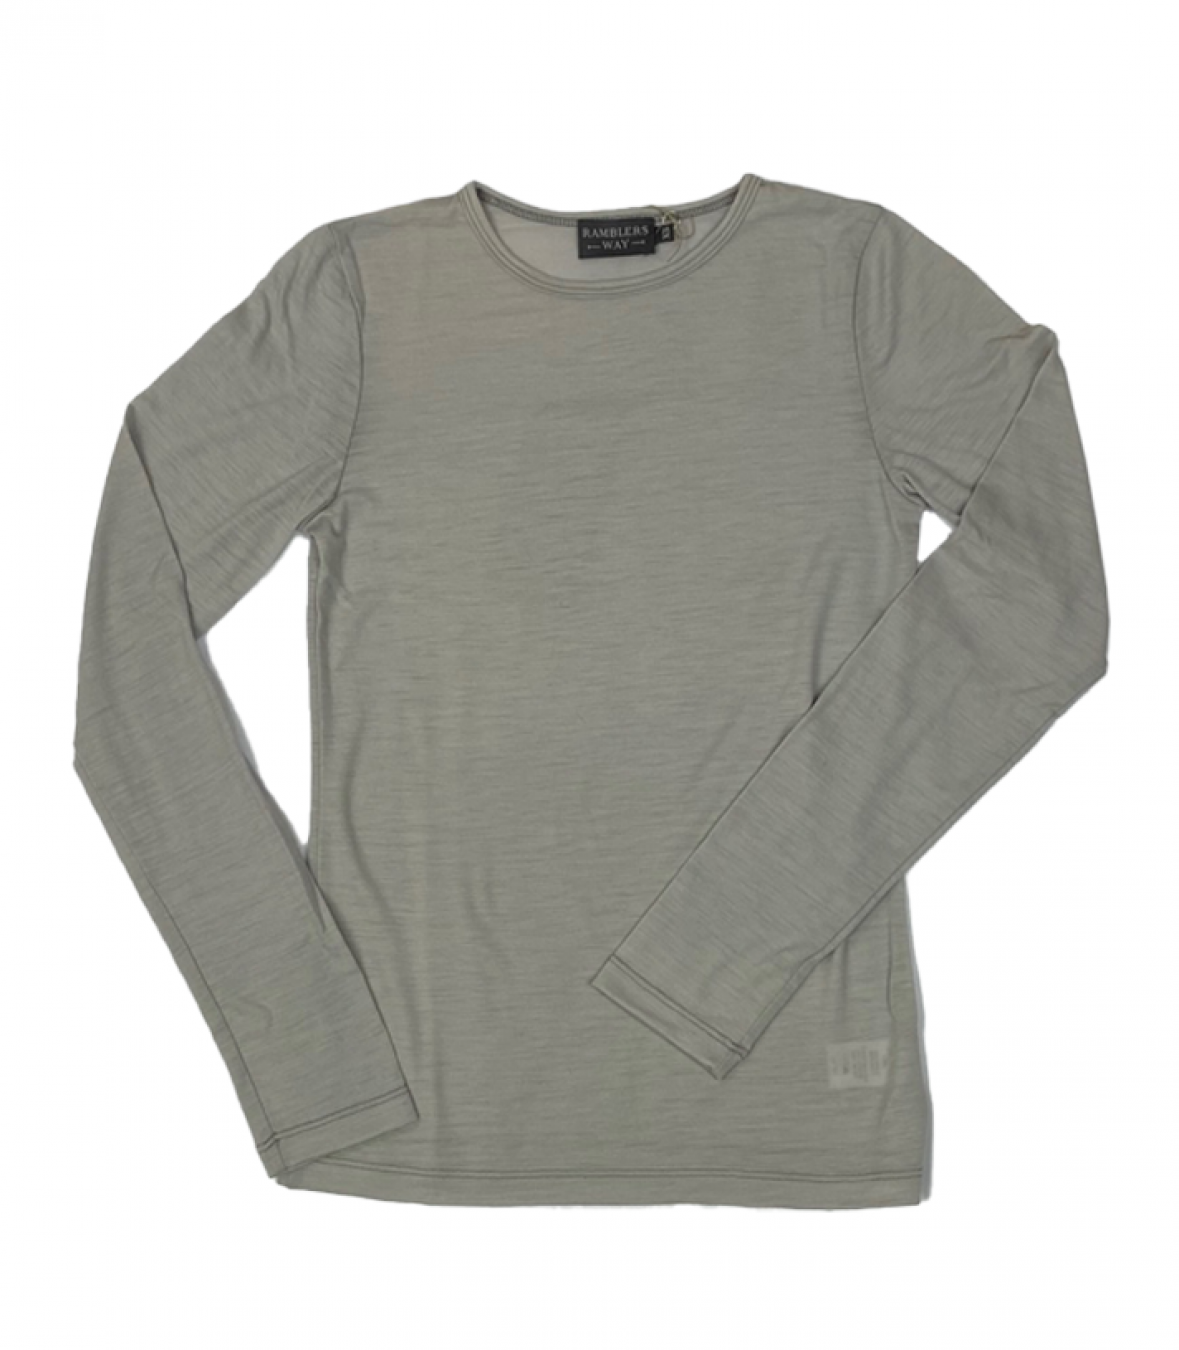 Wool Jewel Neck - Additional Colors Made in USA | RAMBLERS WAY